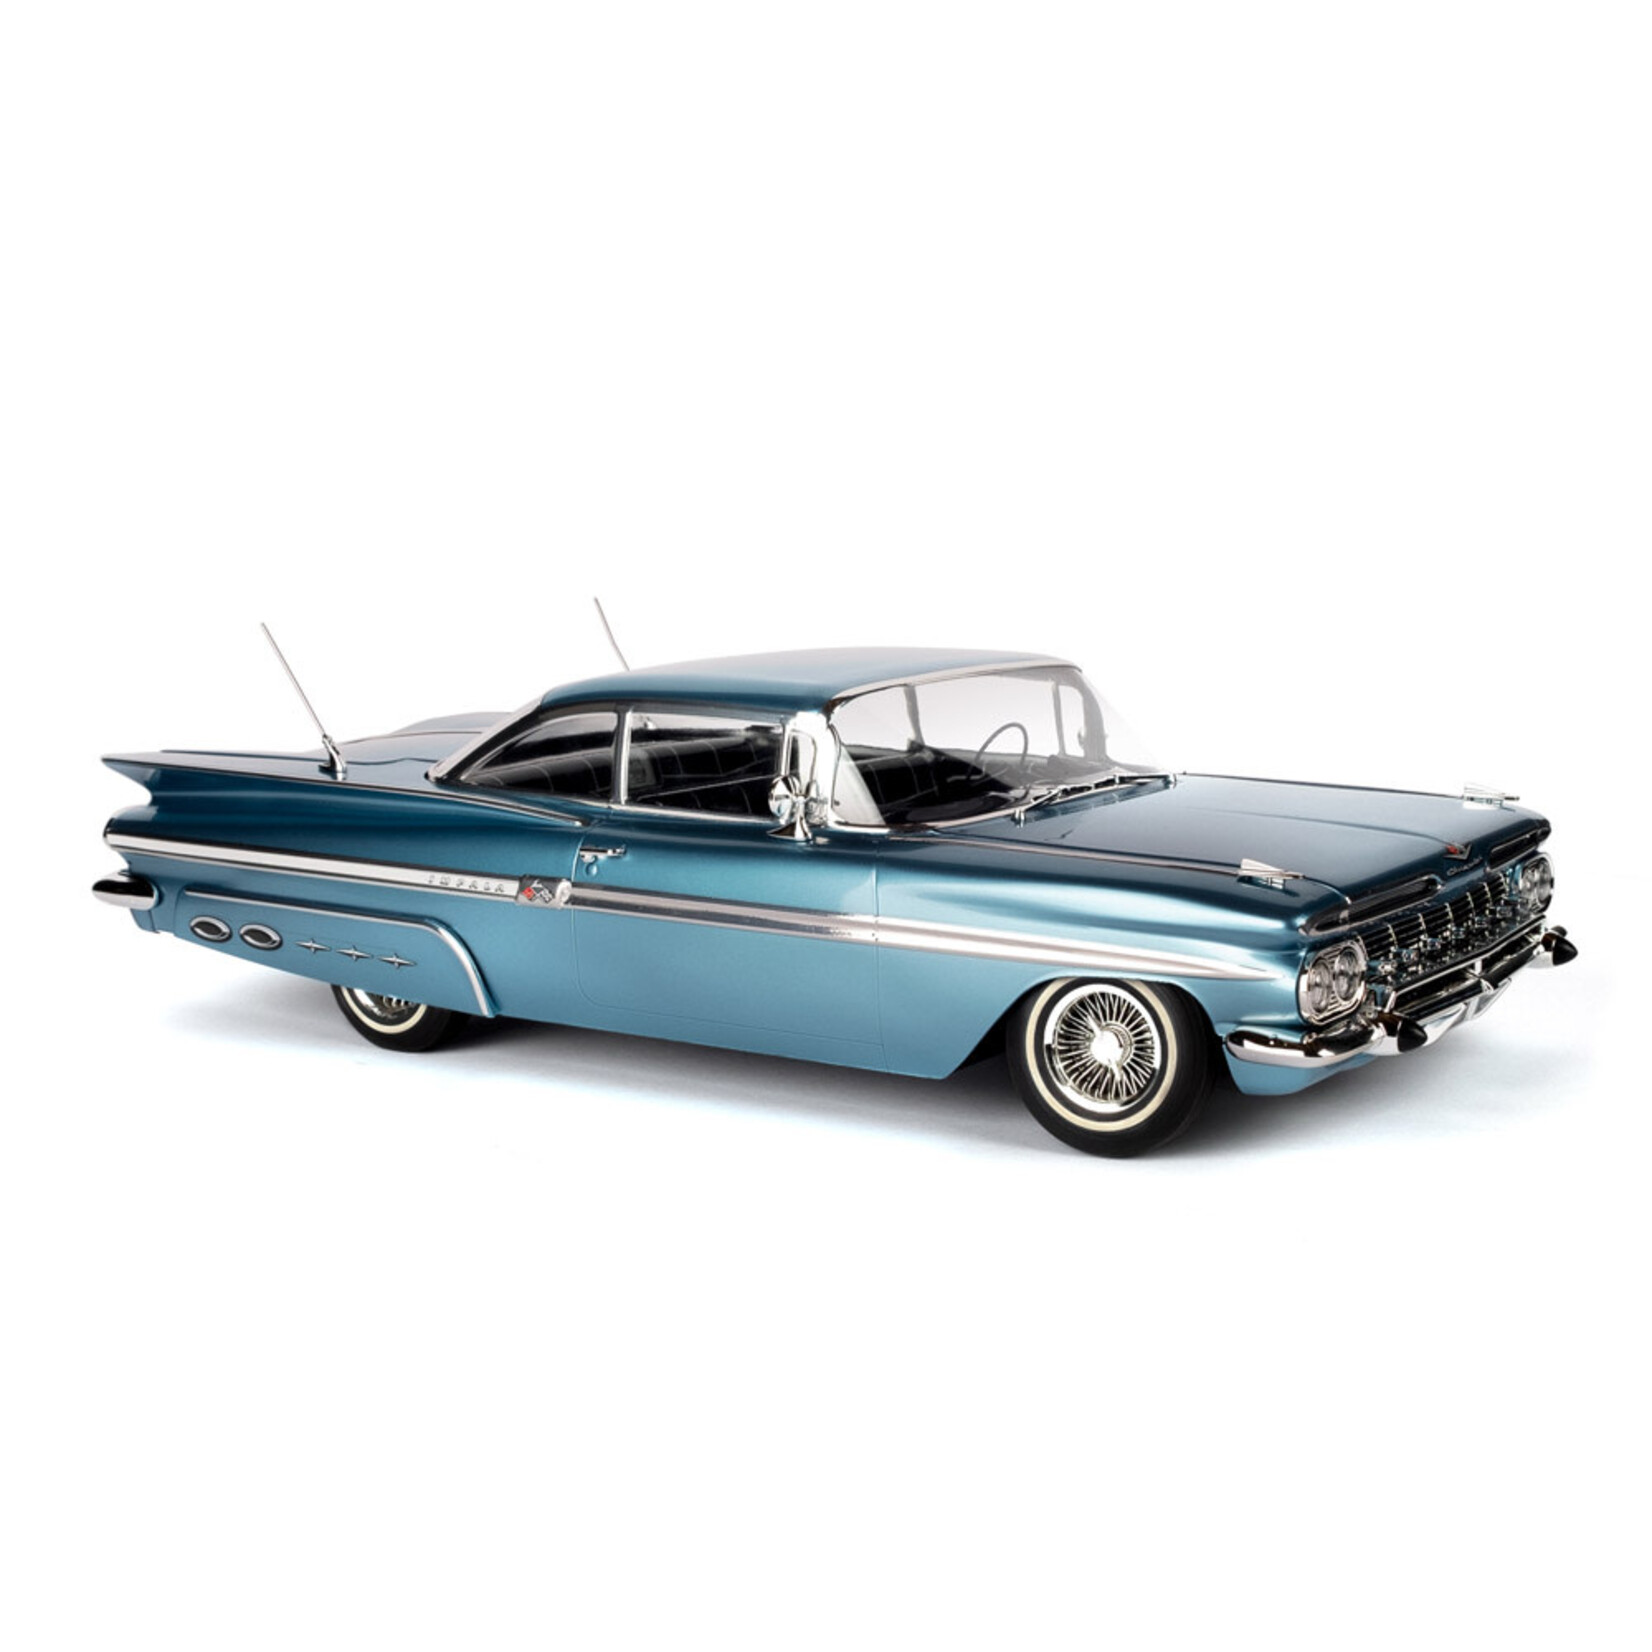 Redcat Racing Fiftynine 1:10 1959 Chevrolet Impala Hopping Lowrider